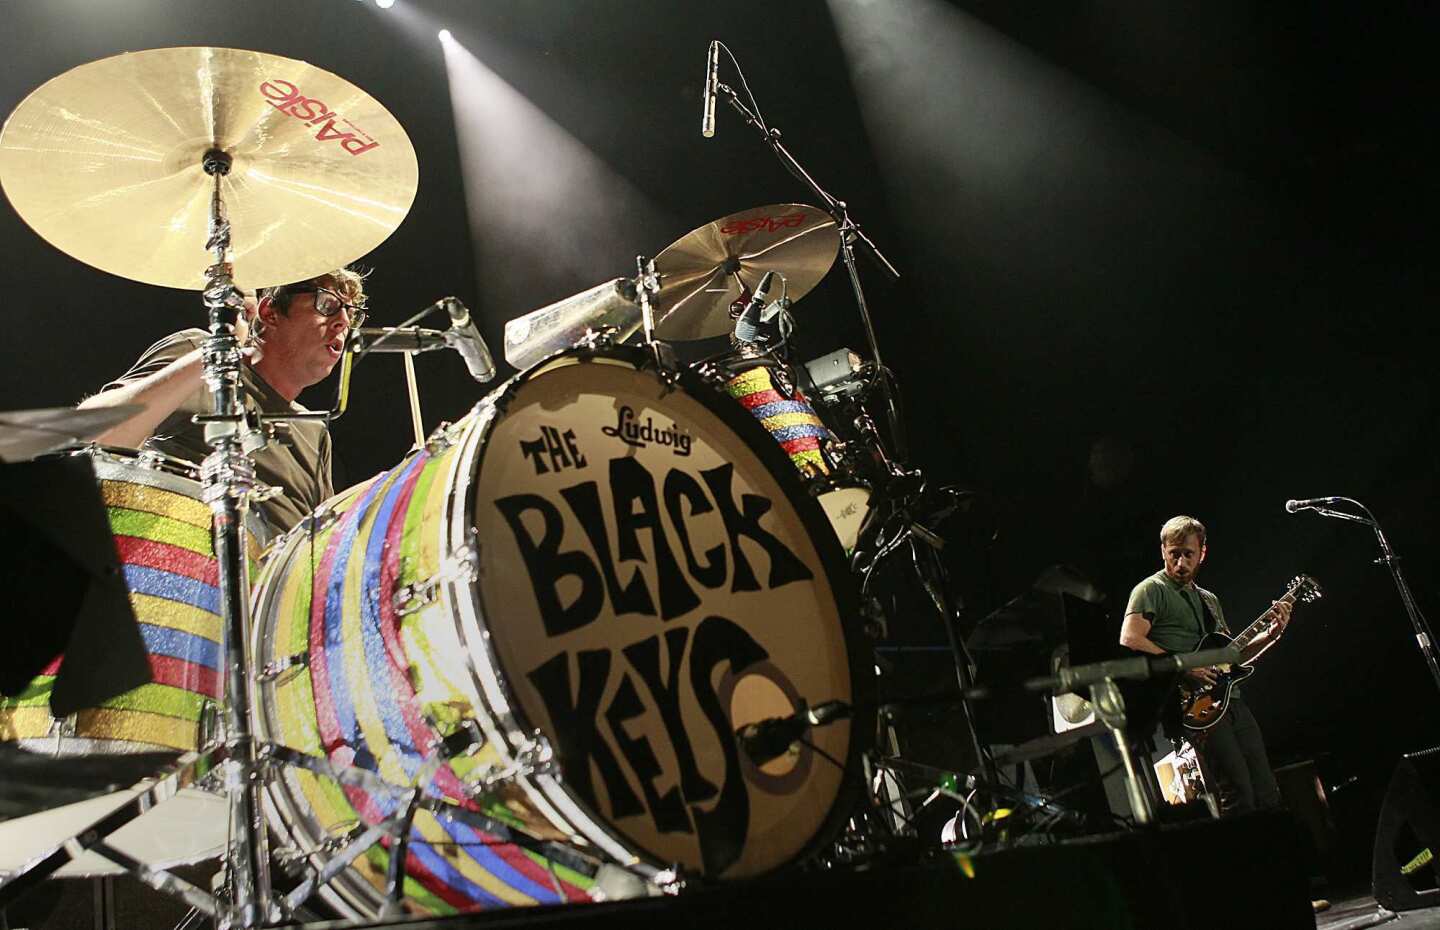 Patrick Carney, left, and Dan Auerbach of the Black Keys perform at Staples Center.